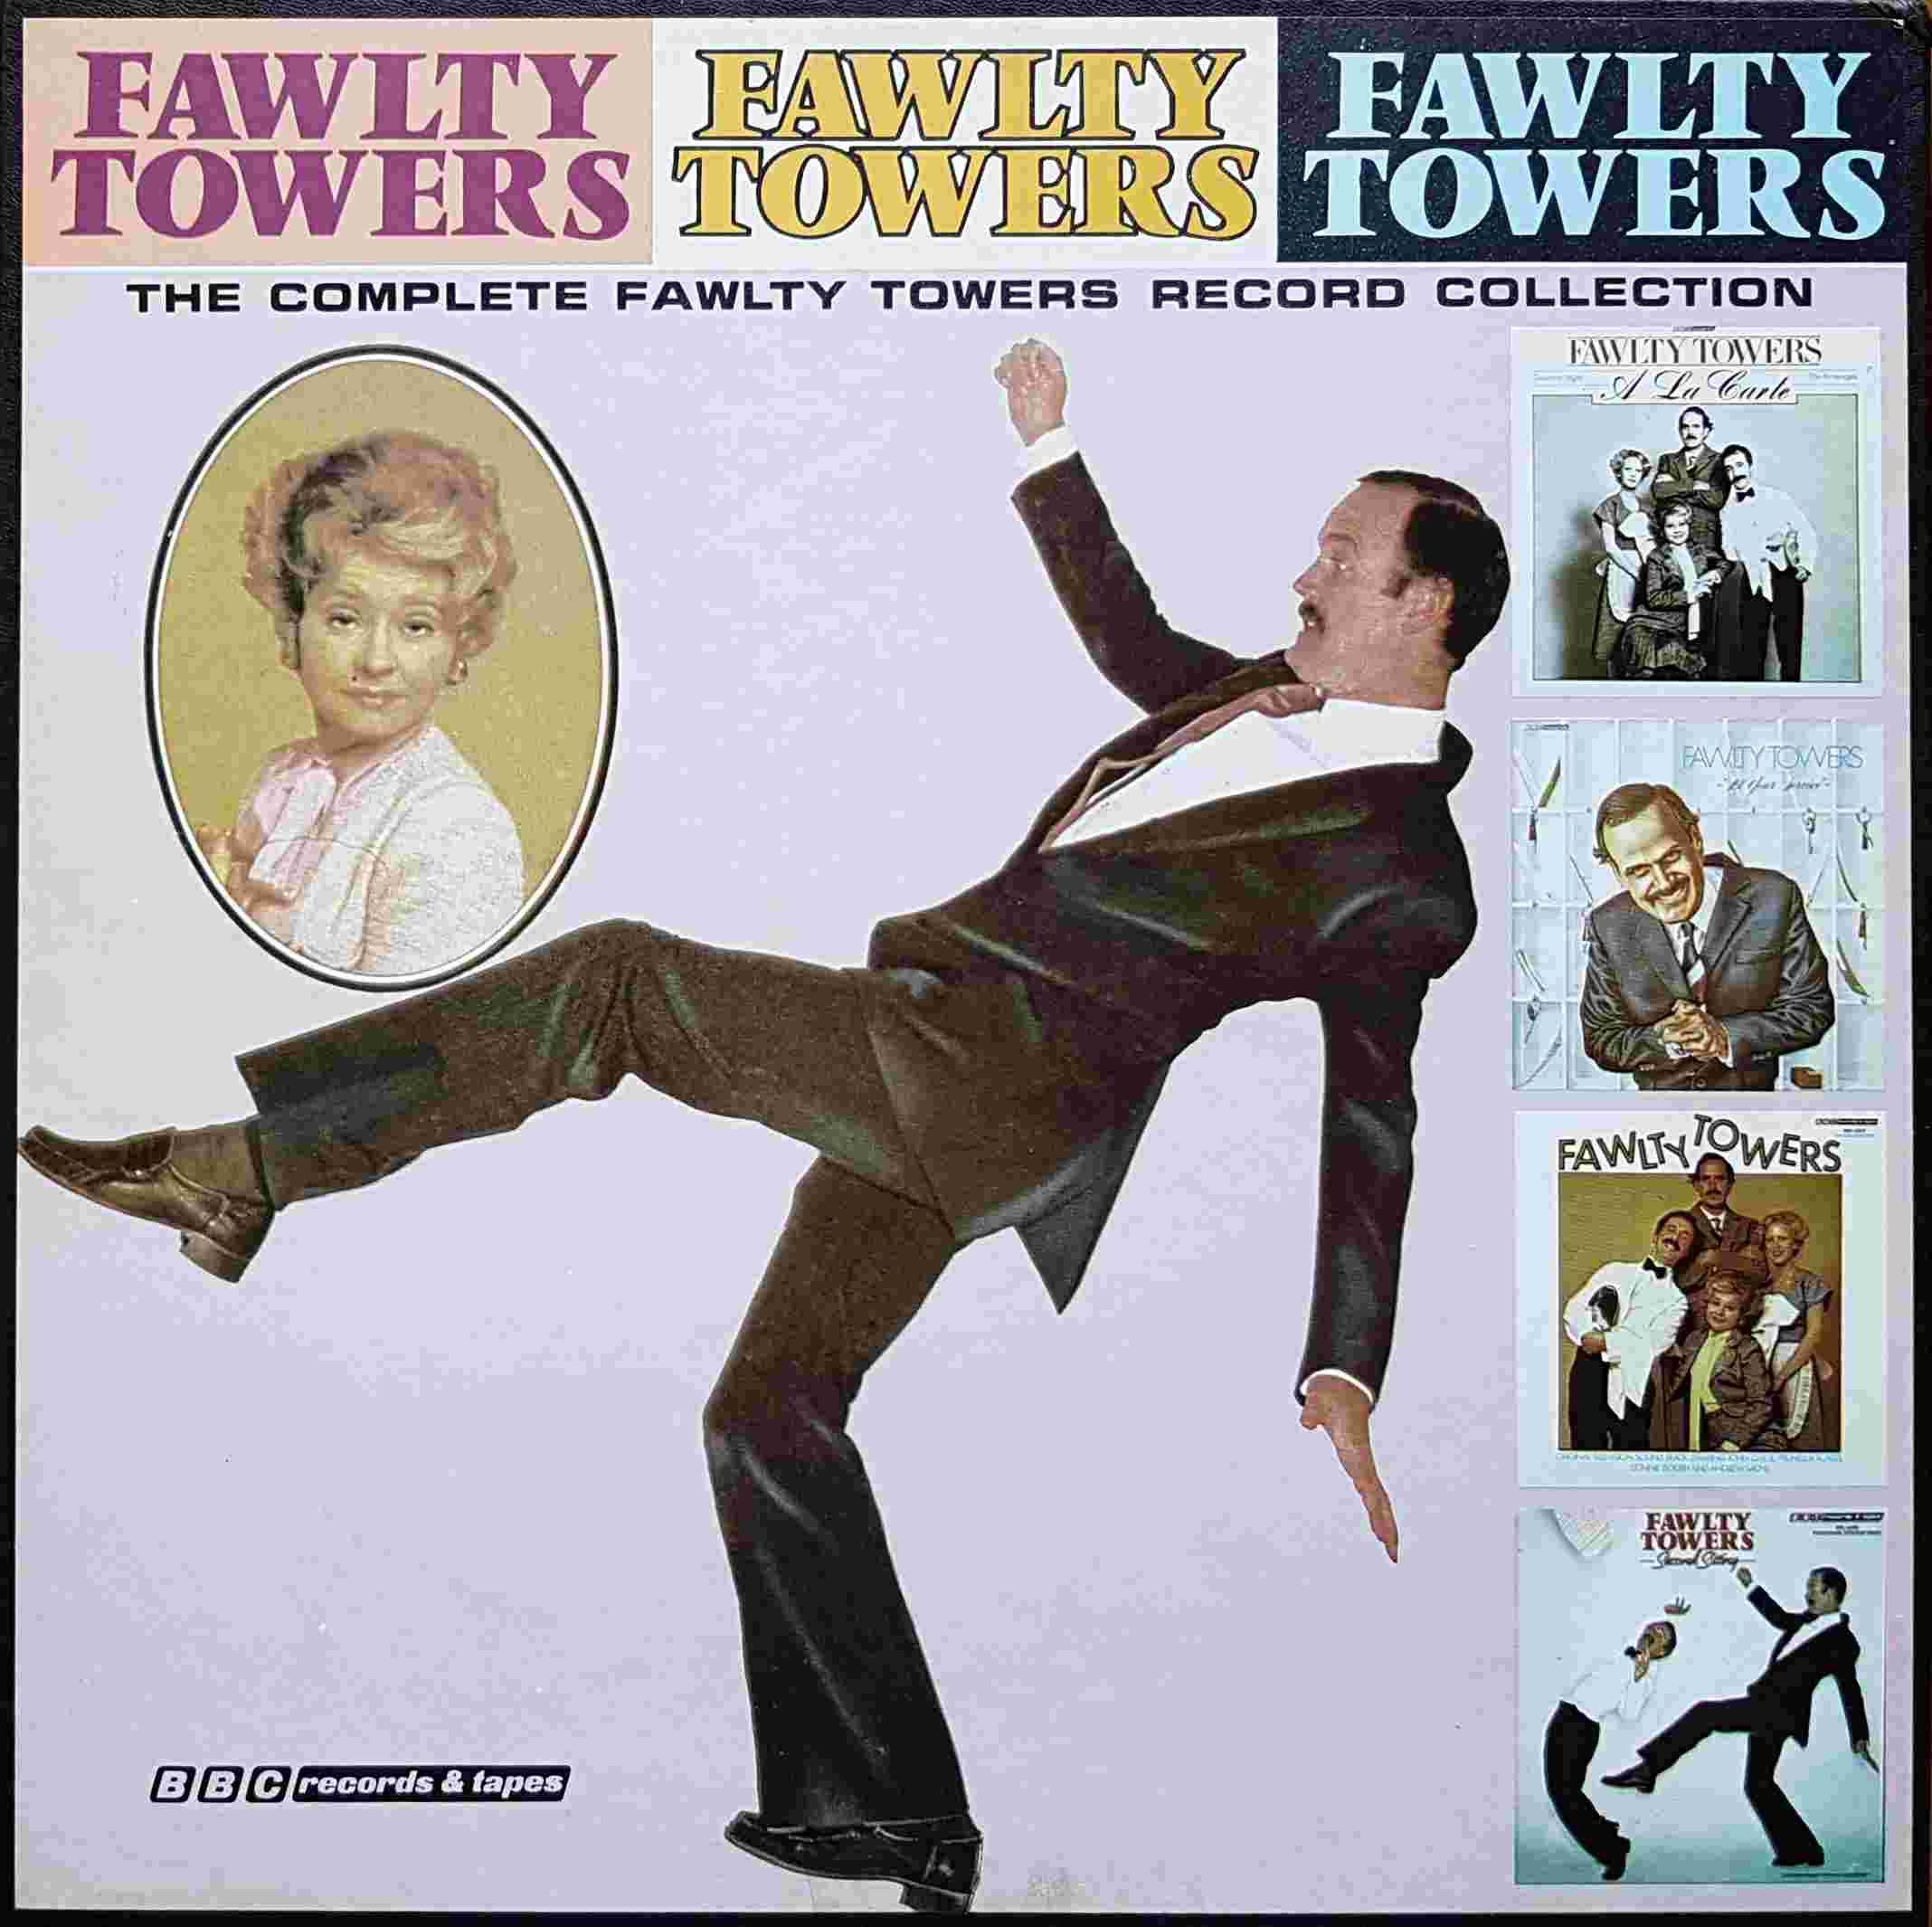 Picture of BBC - 22003 The Complete Fawlty Towers Record Collection by artist John Cleese / Connie Booth from the BBC albums - Records and Tapes library